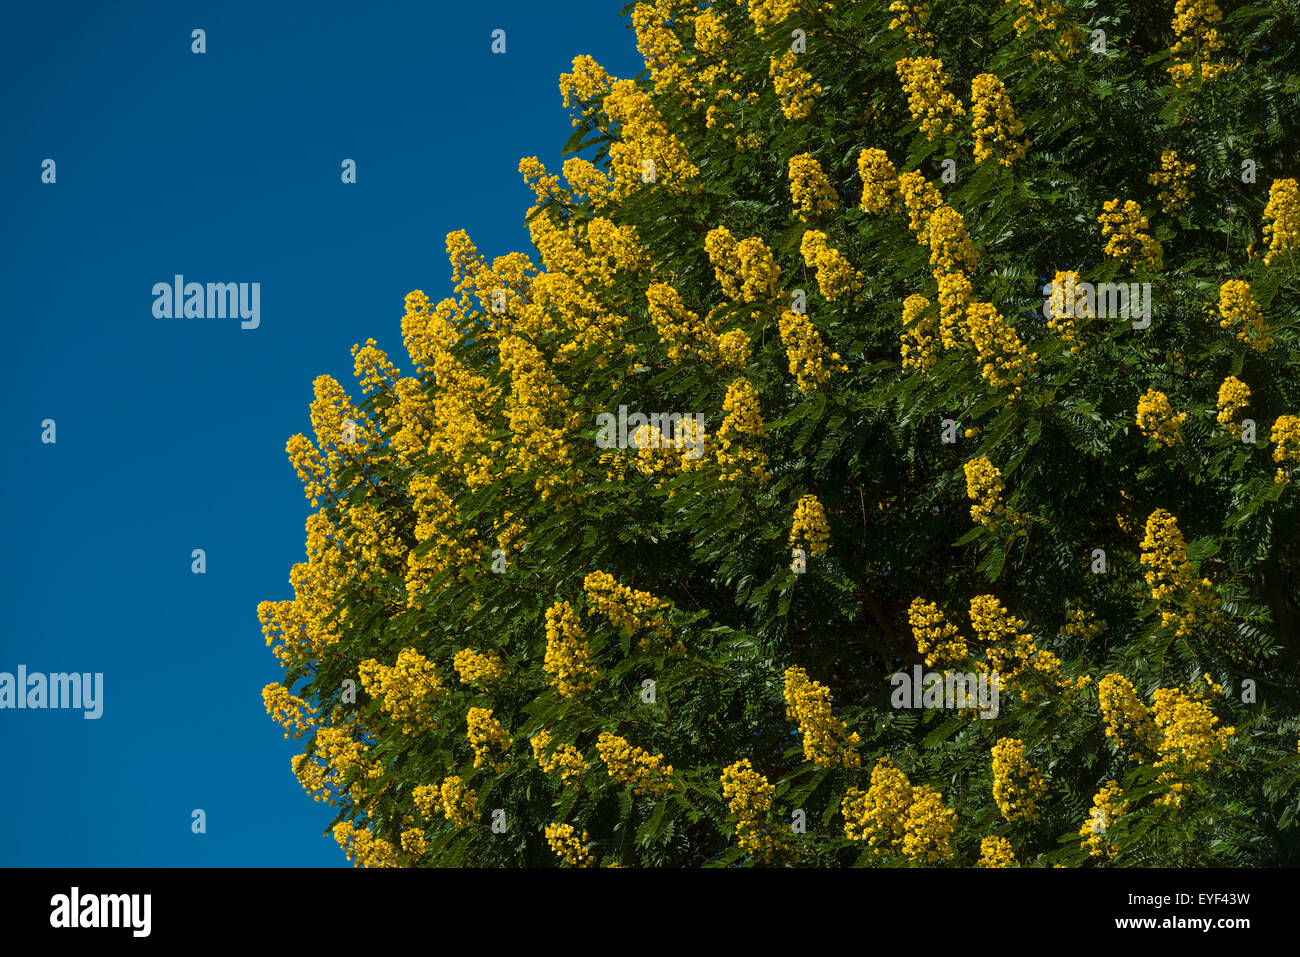 Detail of Winter Cassia tree covered in yellow flowers, Satemwa Tea Estate; Thyolo, Malawi Stock Photo